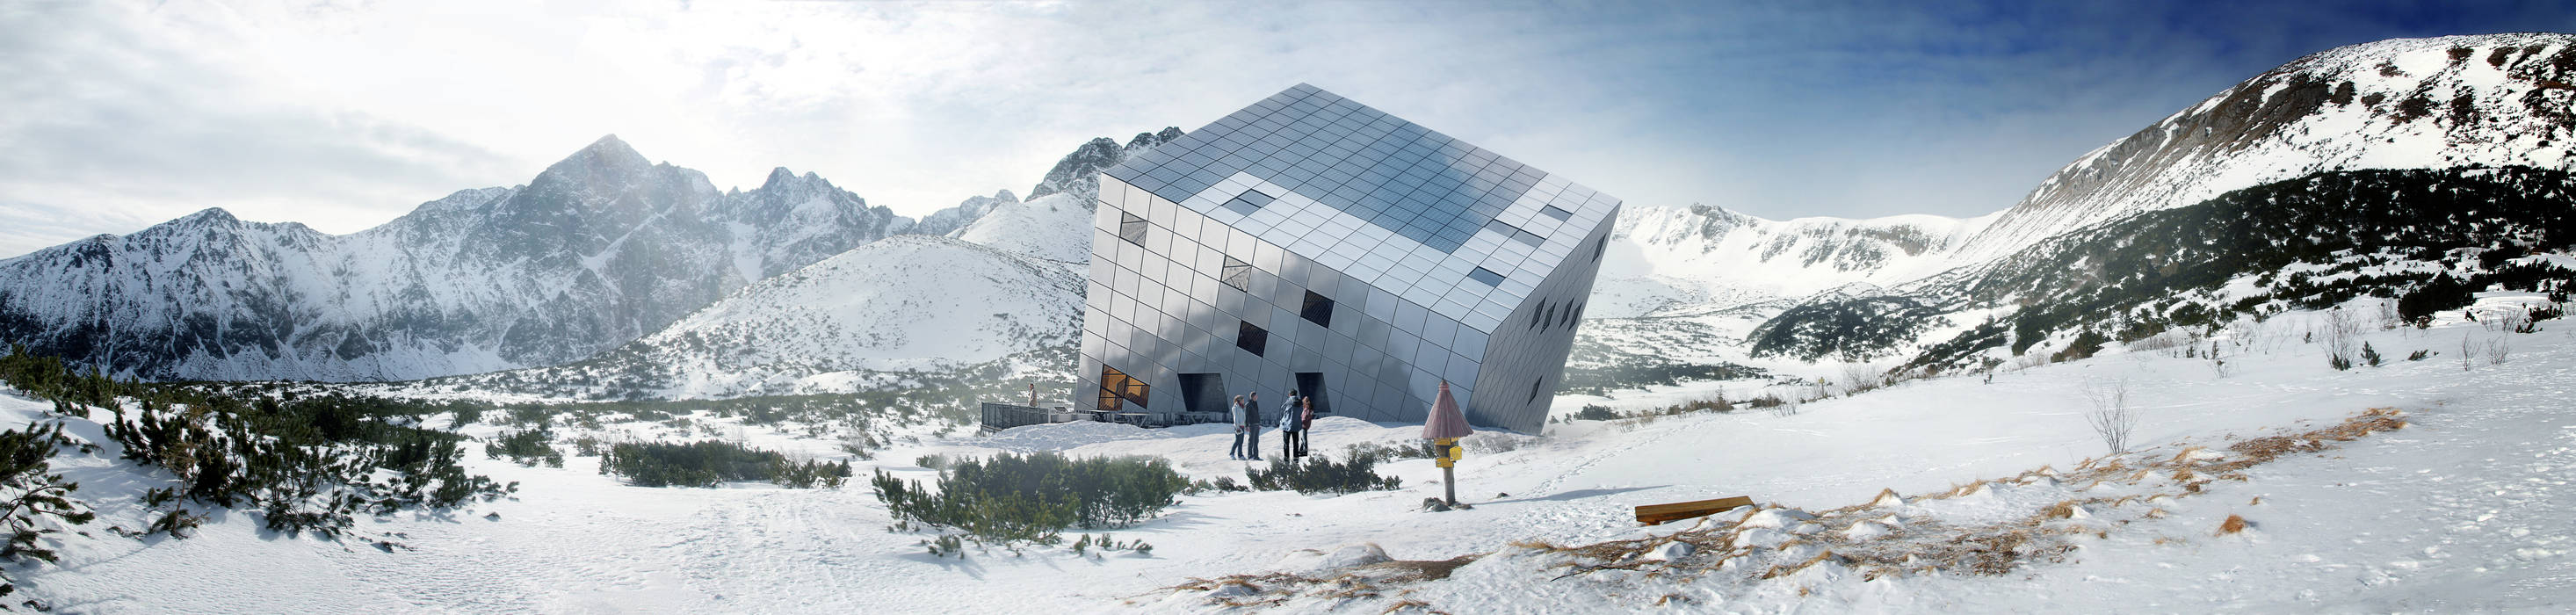 SUSTAINABLE PASSIVE MOUNTAIN HUT IN THE HIGH TATRAS, ATELIER 8000 ATELIER 8000 Modern houses